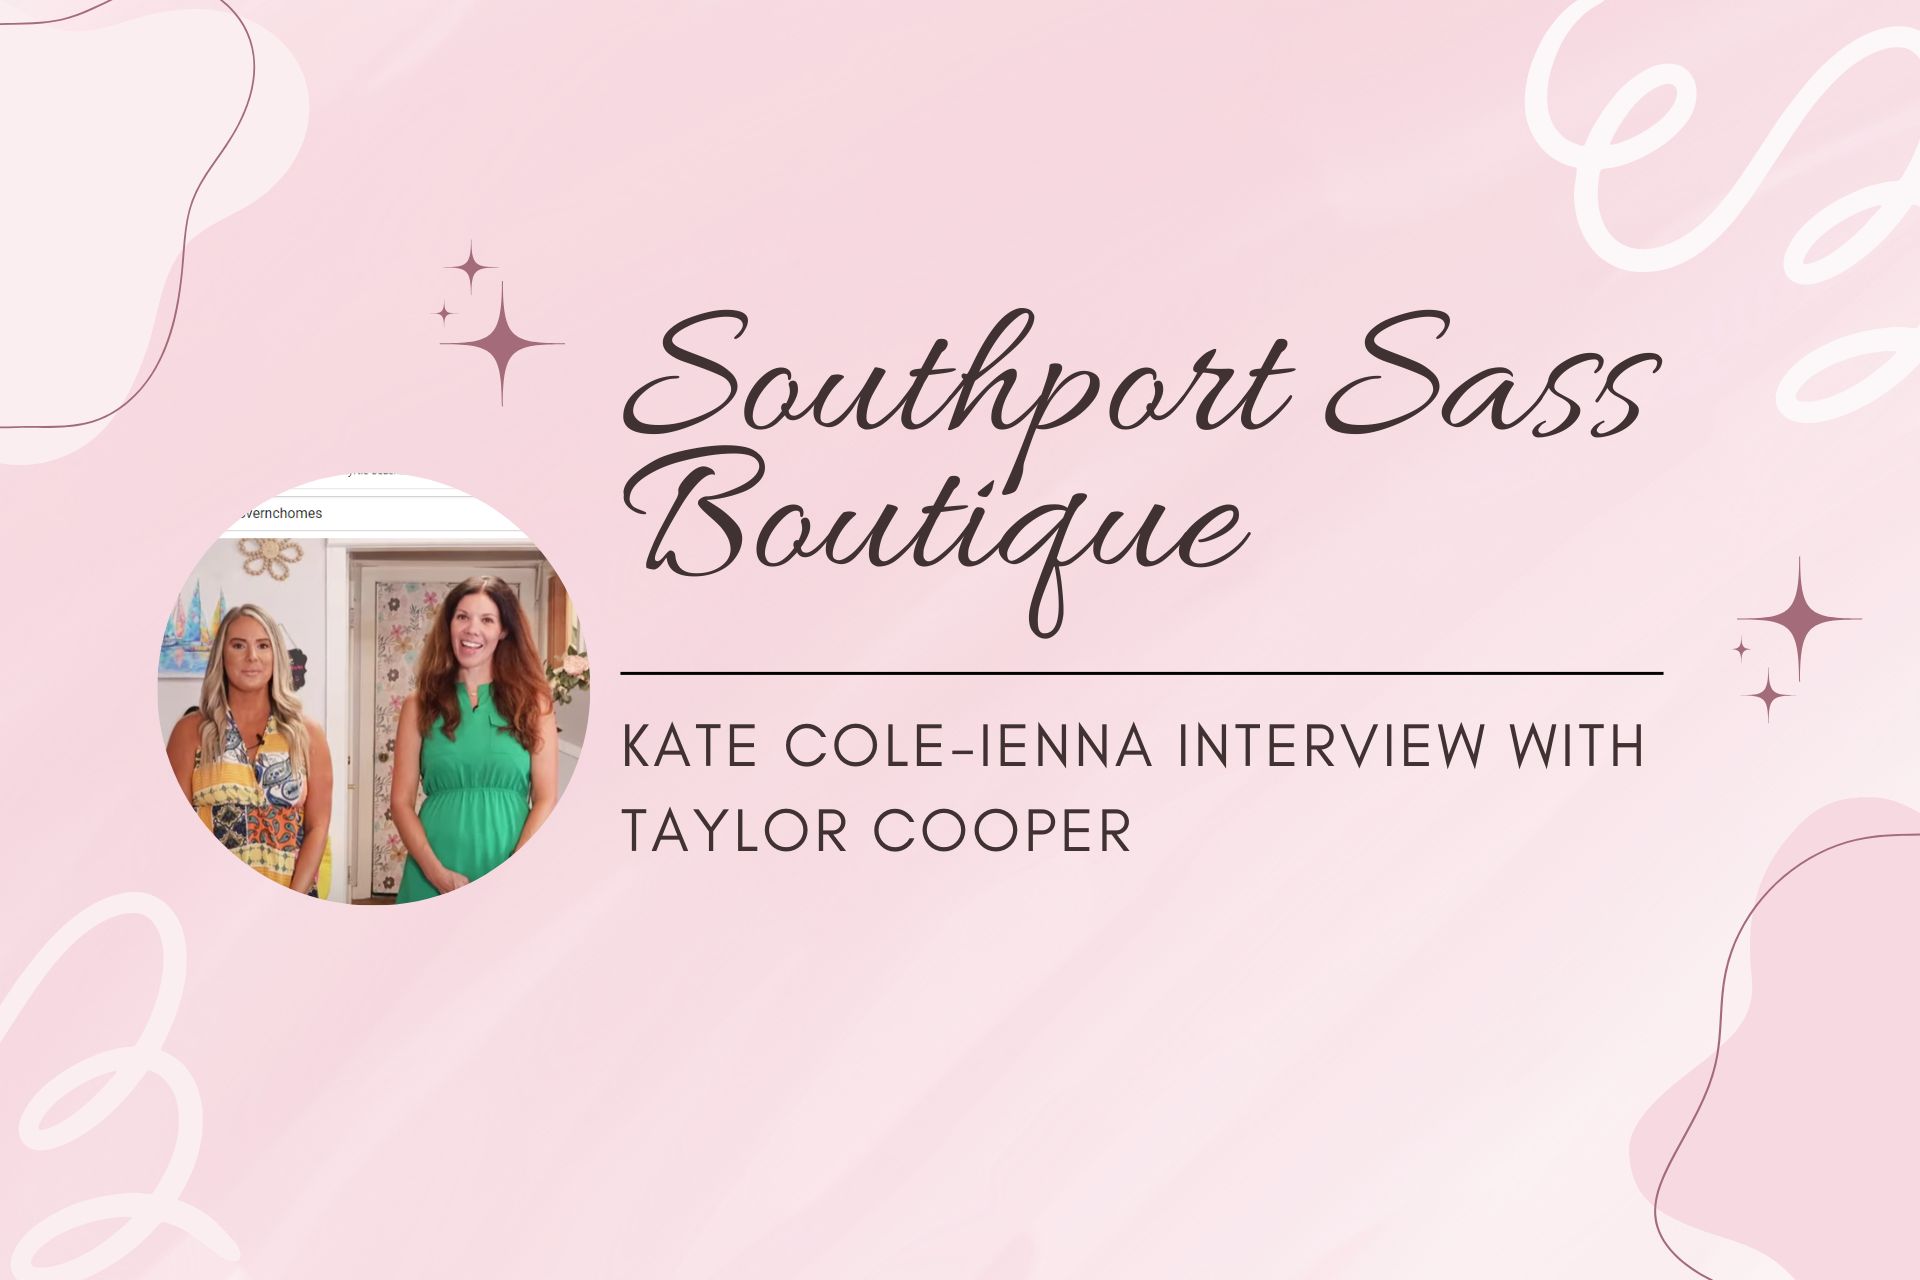 Southporet Sass Boutique Interview by Kate Cole-Ienna